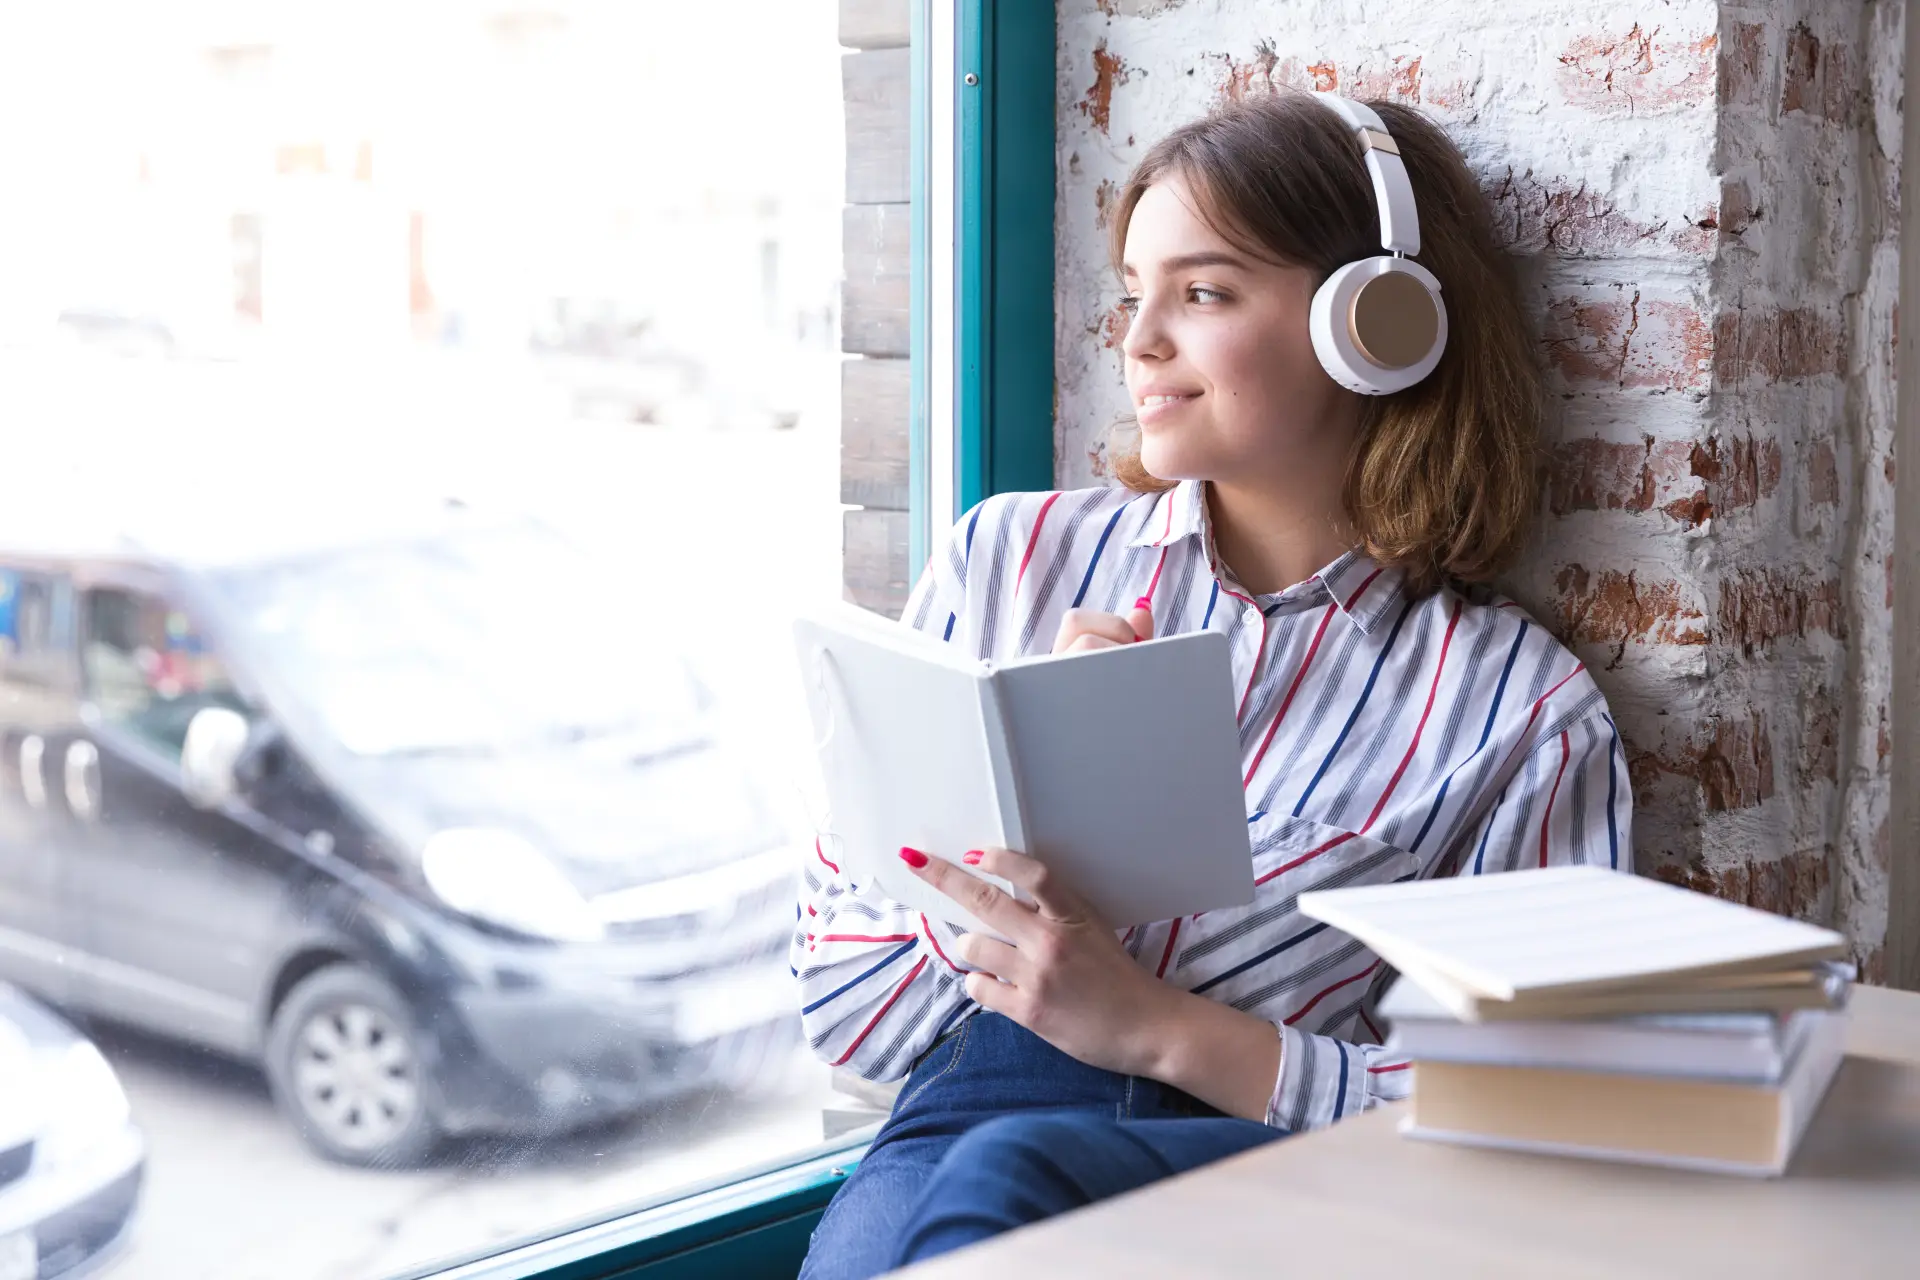 teenager-girl-headphones-sitting-with-open-book-looking-out-window